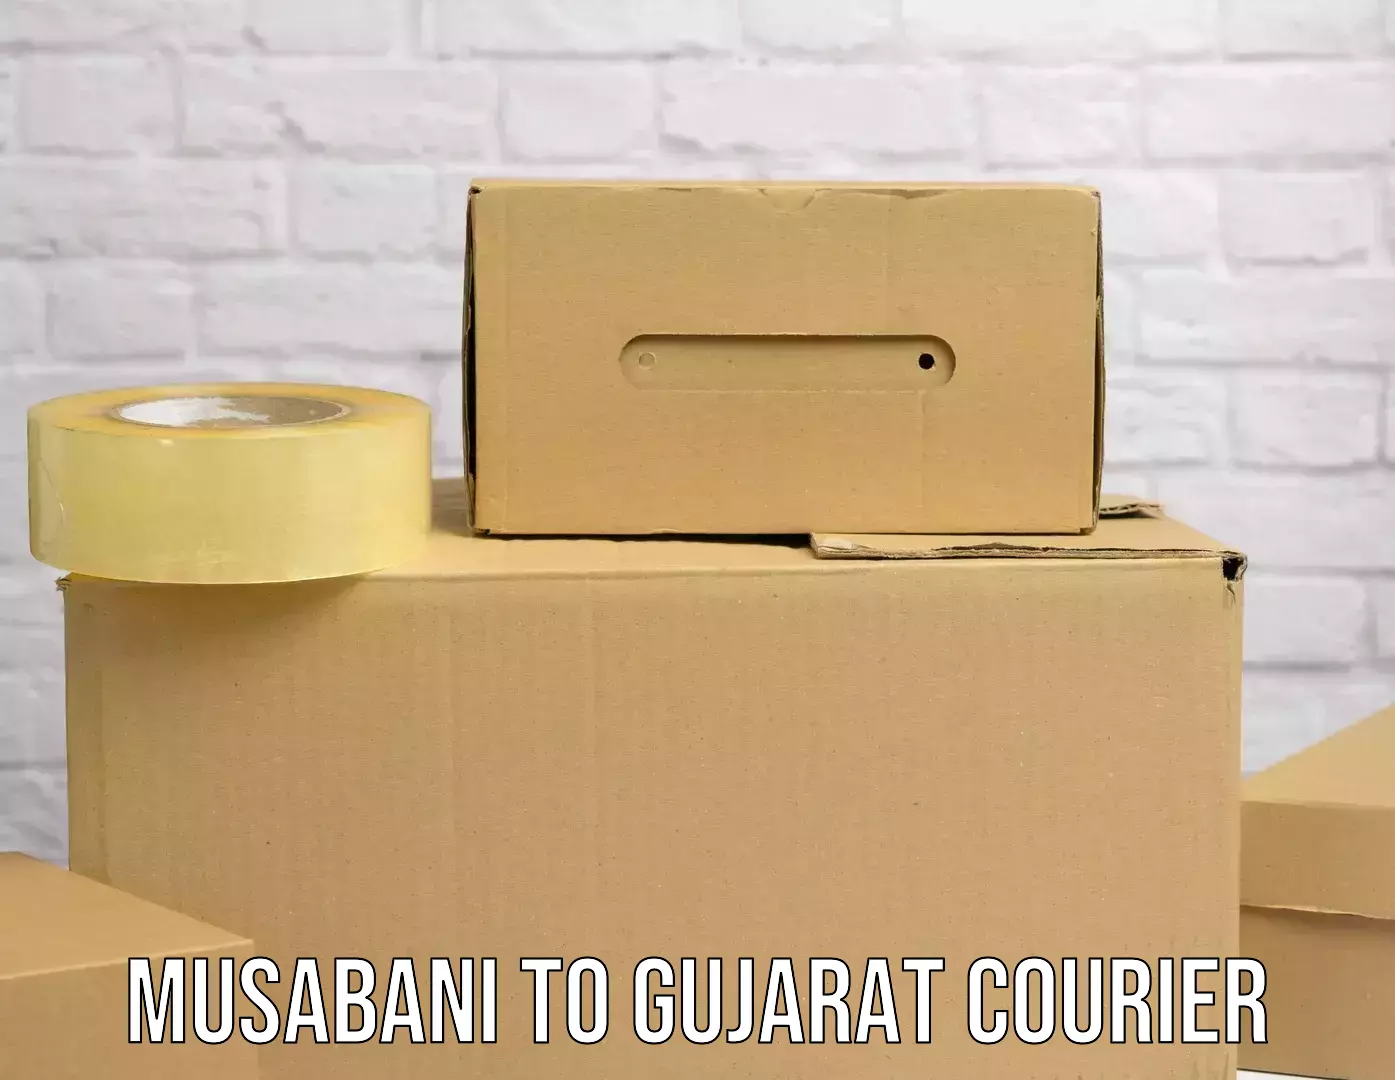 Express delivery network Musabani to Godhra